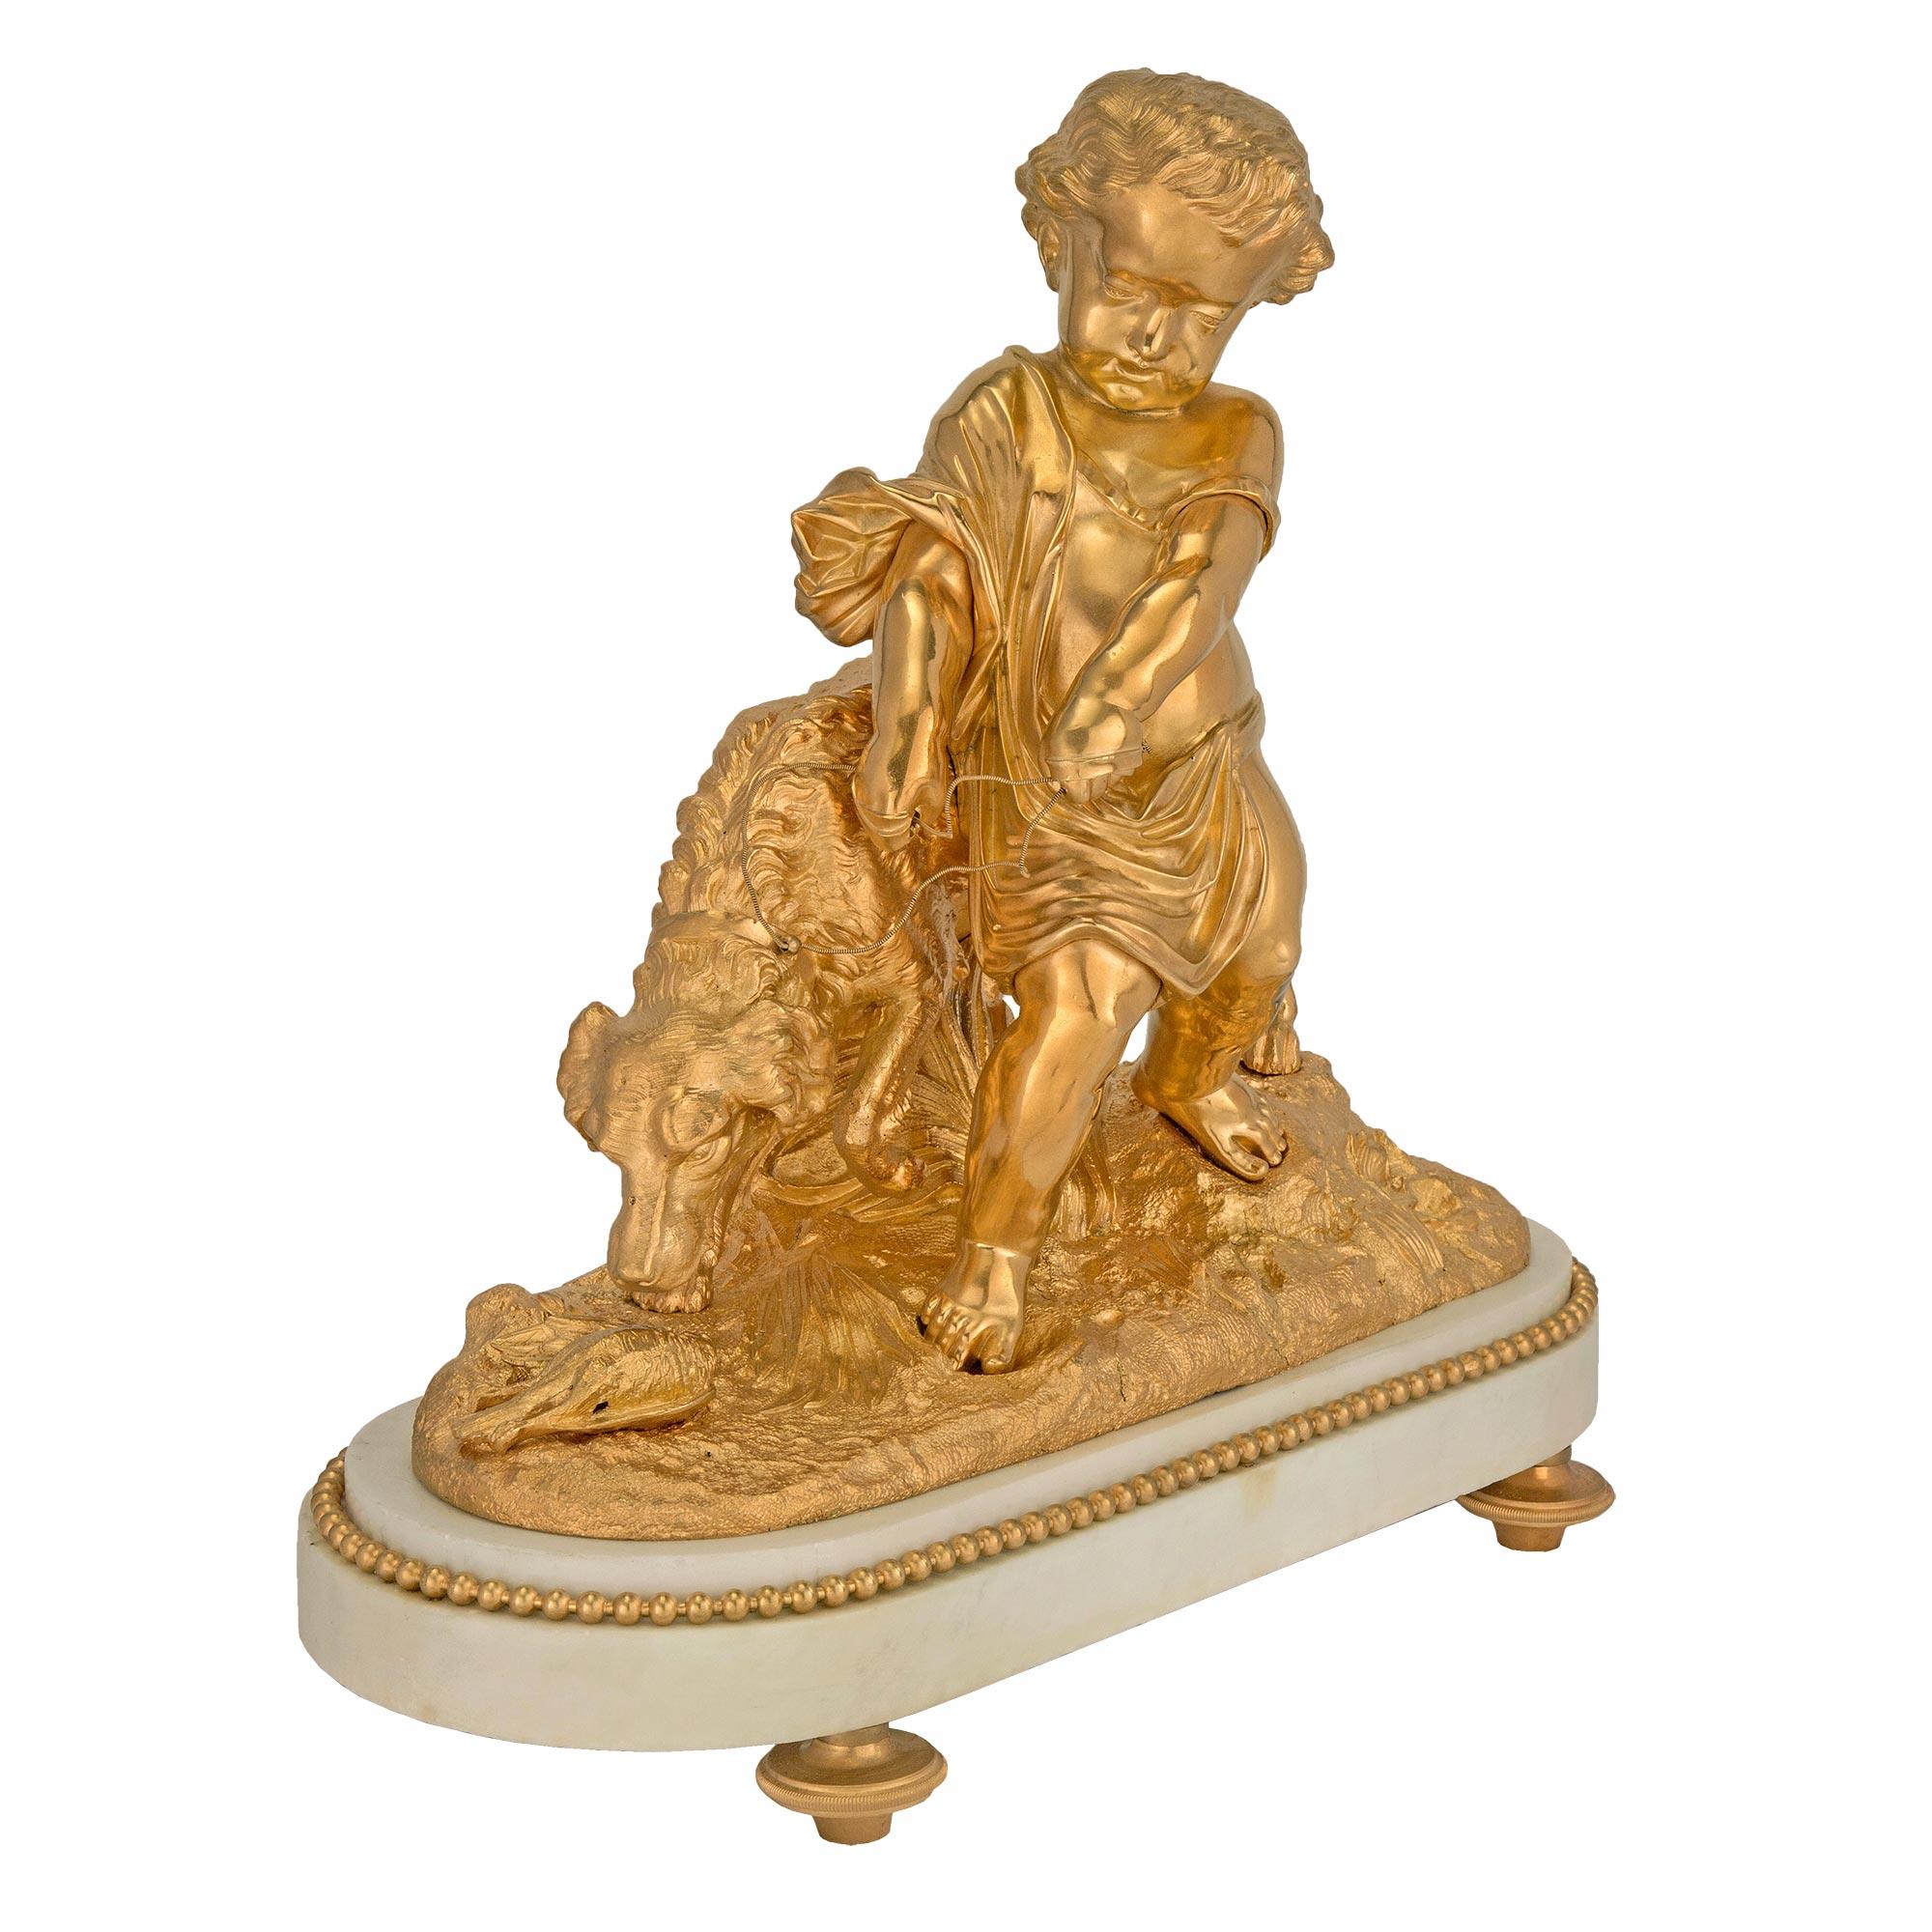 A high quality and charming French 19th century Louis XVI St. ormolu and White Carrara marble statue. Raised by a thick oval white Carrara marble base with ormolu topic shaped feet and a mottled top with a fitted beaded ormolu trim. The ormolu